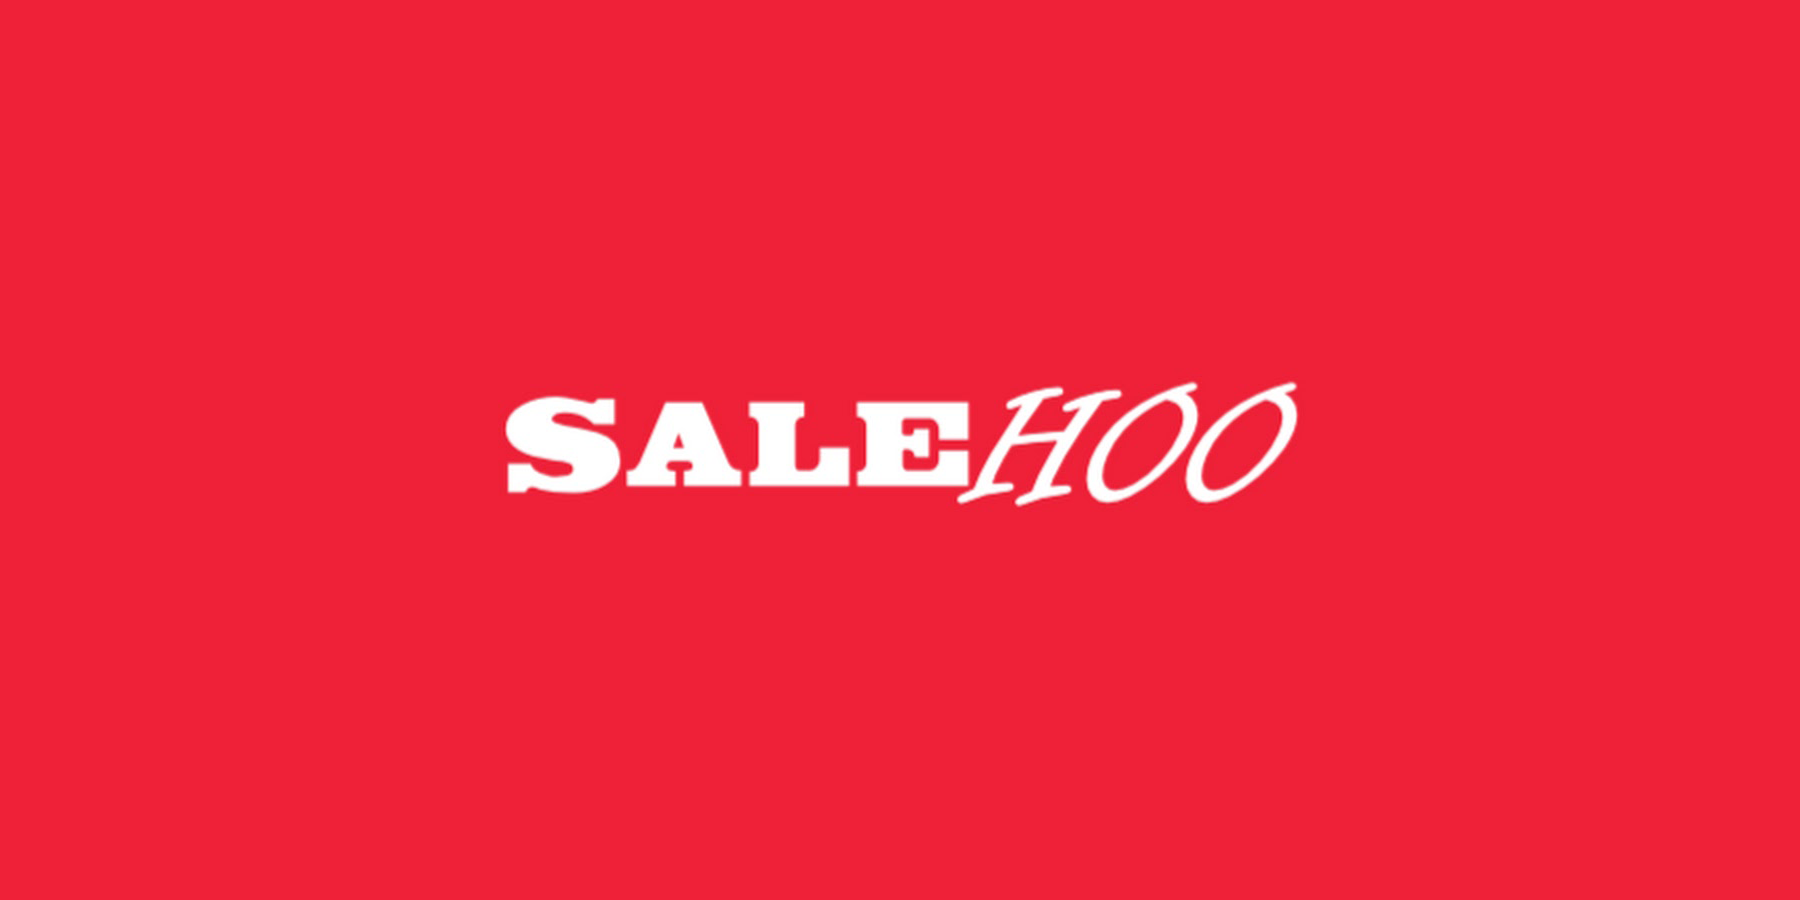 10 Biggest Salehoo Review Mistakes You Can Easily Avoid